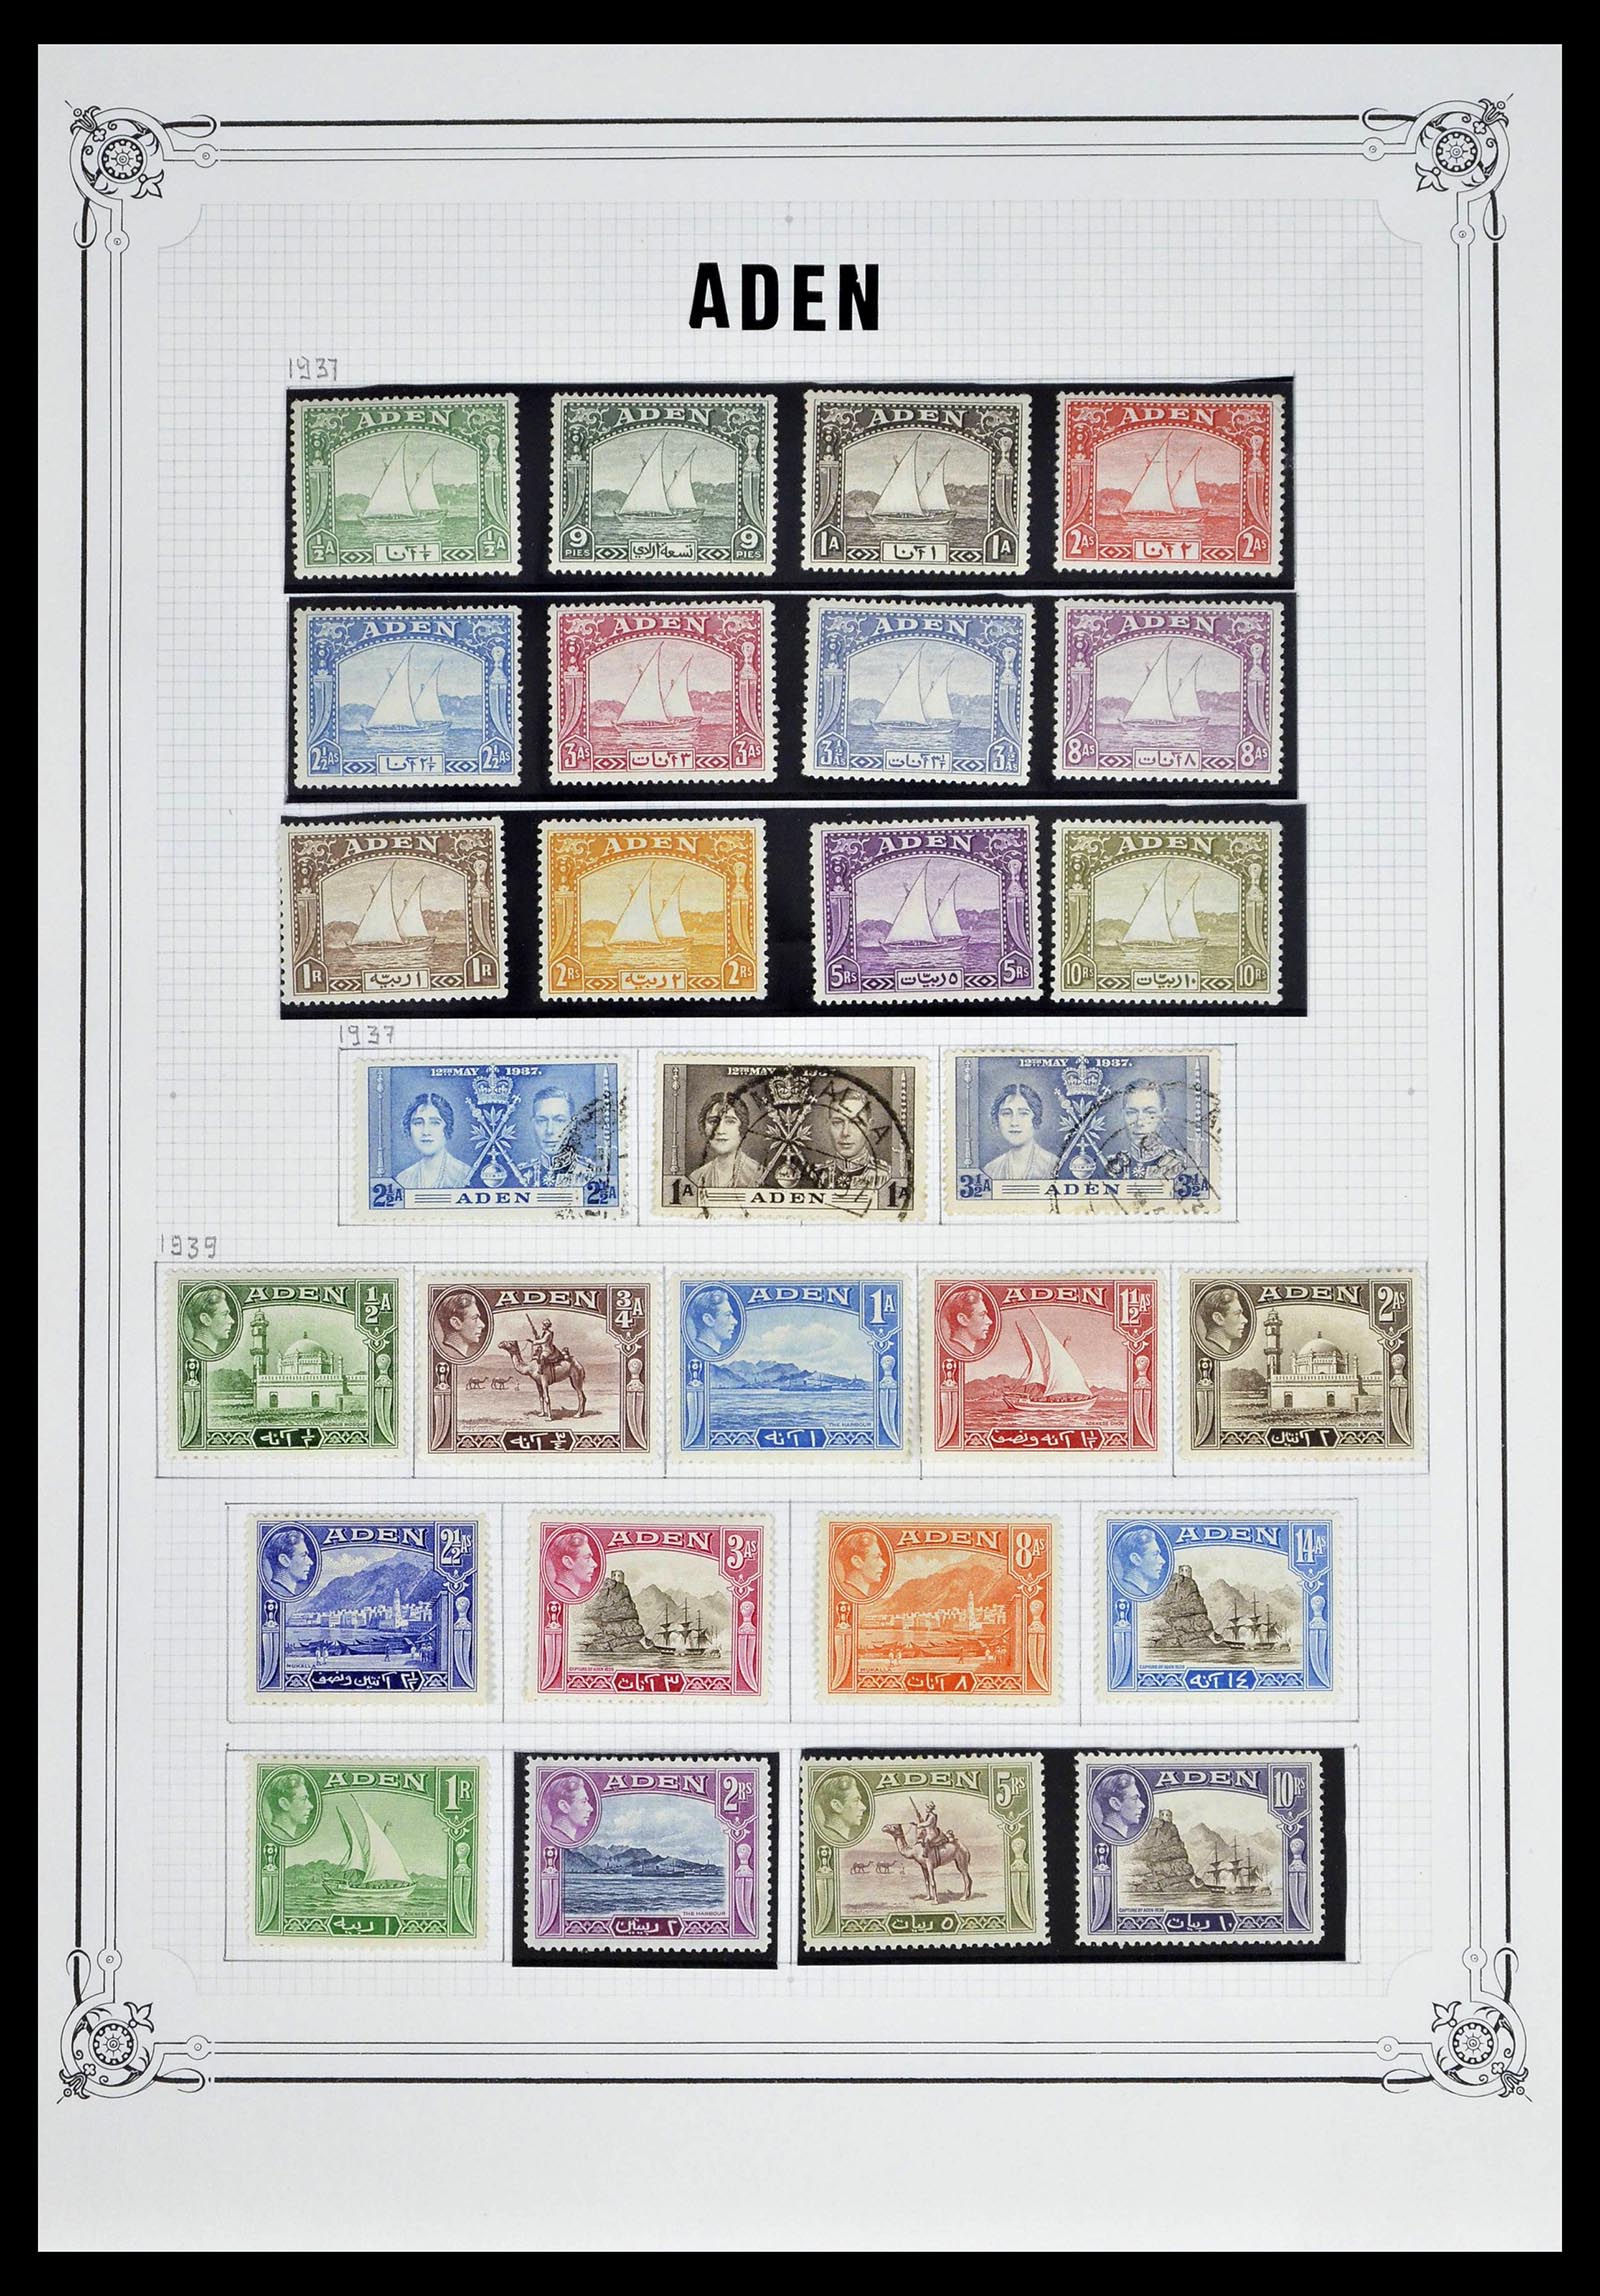 39288 0001 - Stamp collection 39288 Aden 1937-1942.